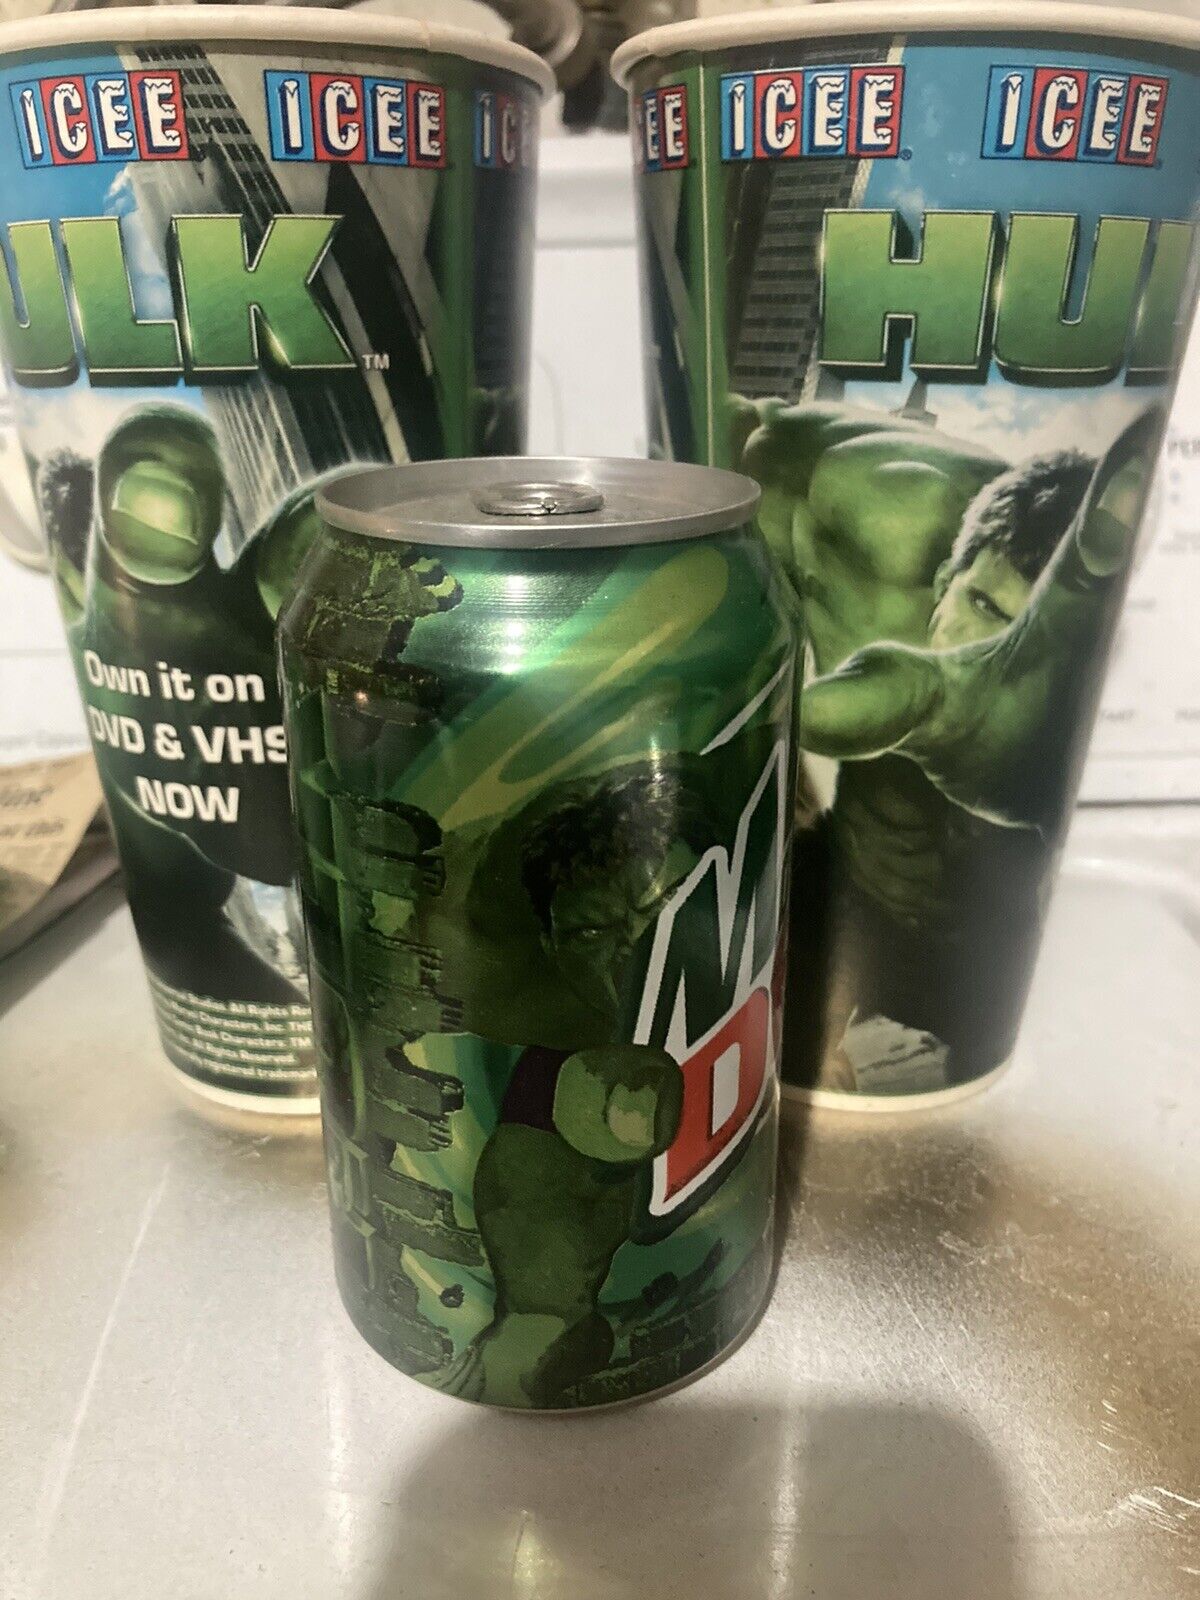 Incredible Hulk 2 Icee Cups And A Mountain Dew Can